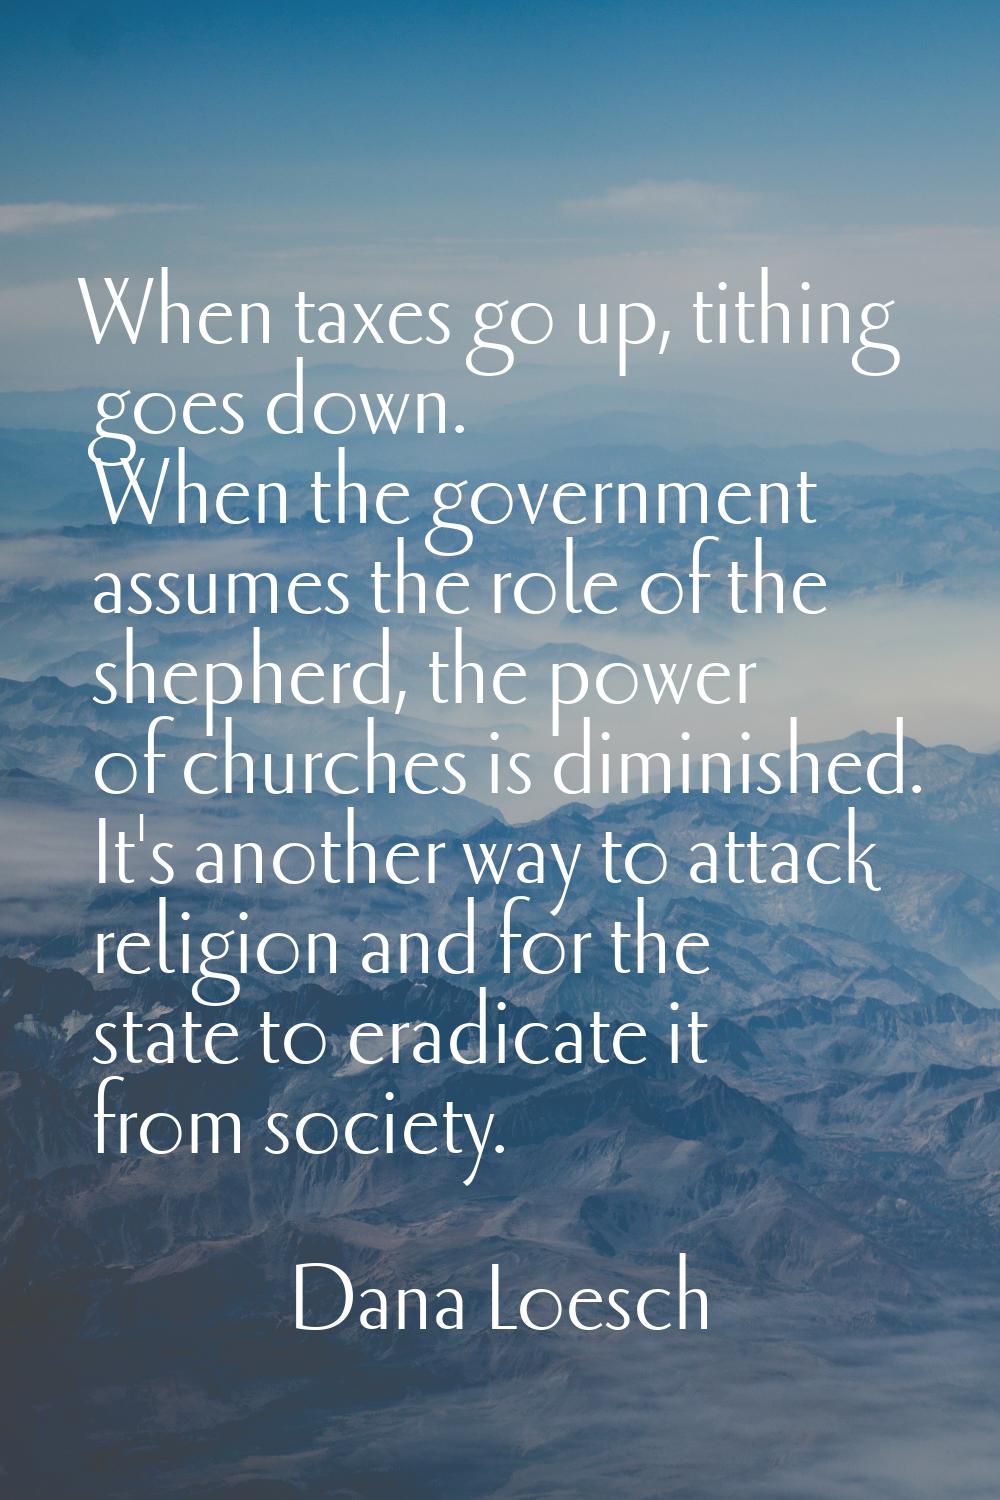 When taxes go up, tithing goes down. When the government assumes the role of the shepherd, the powe